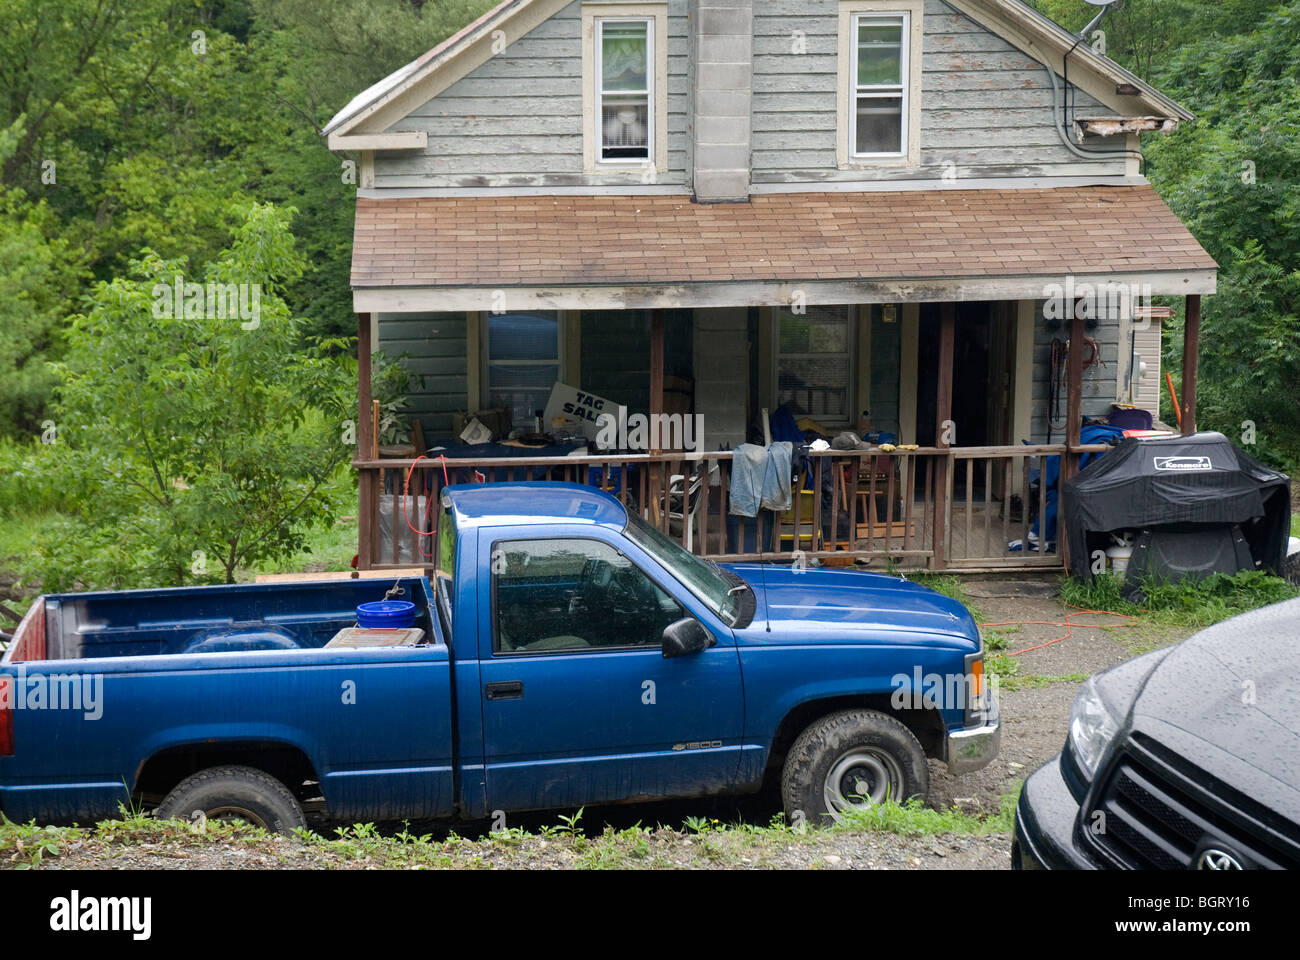 Rural American house with porch and tag sale & pick-up truck Stock Photo